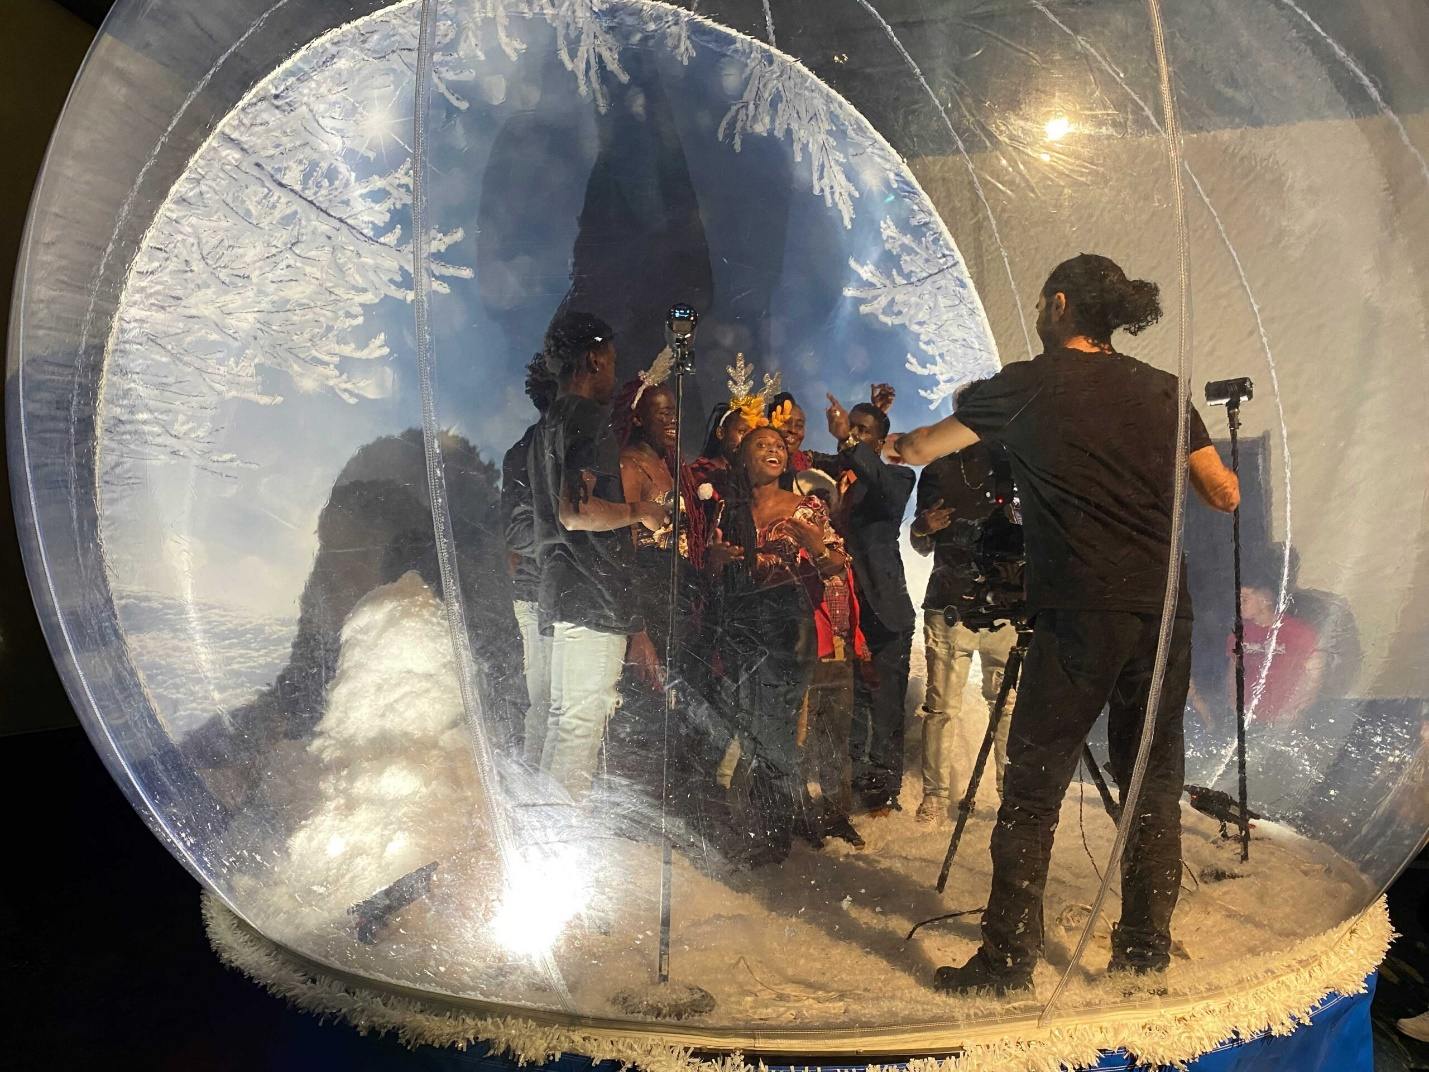 A photographer gets ready to take a still photo of guests in a snow globe